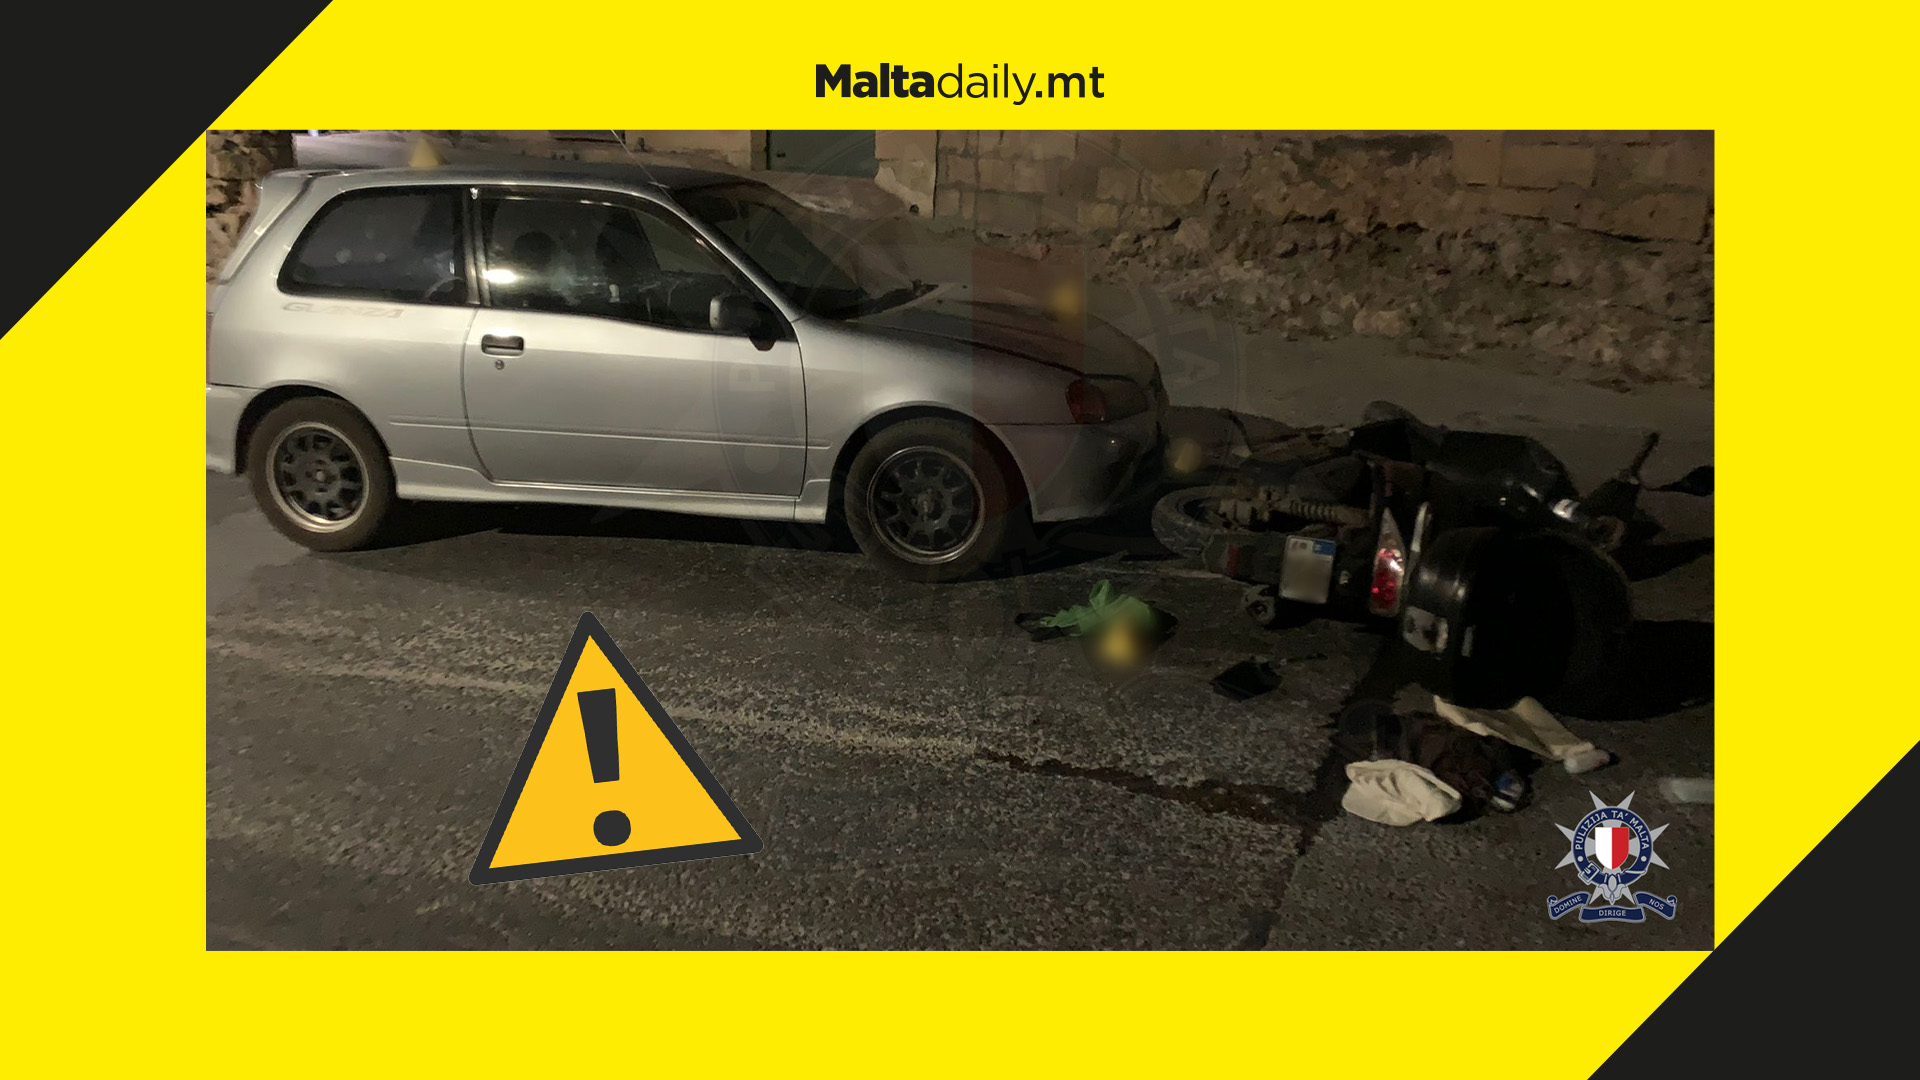 Amount of road incidents in Malta 'totally unacceptable in civilised society', say doctors